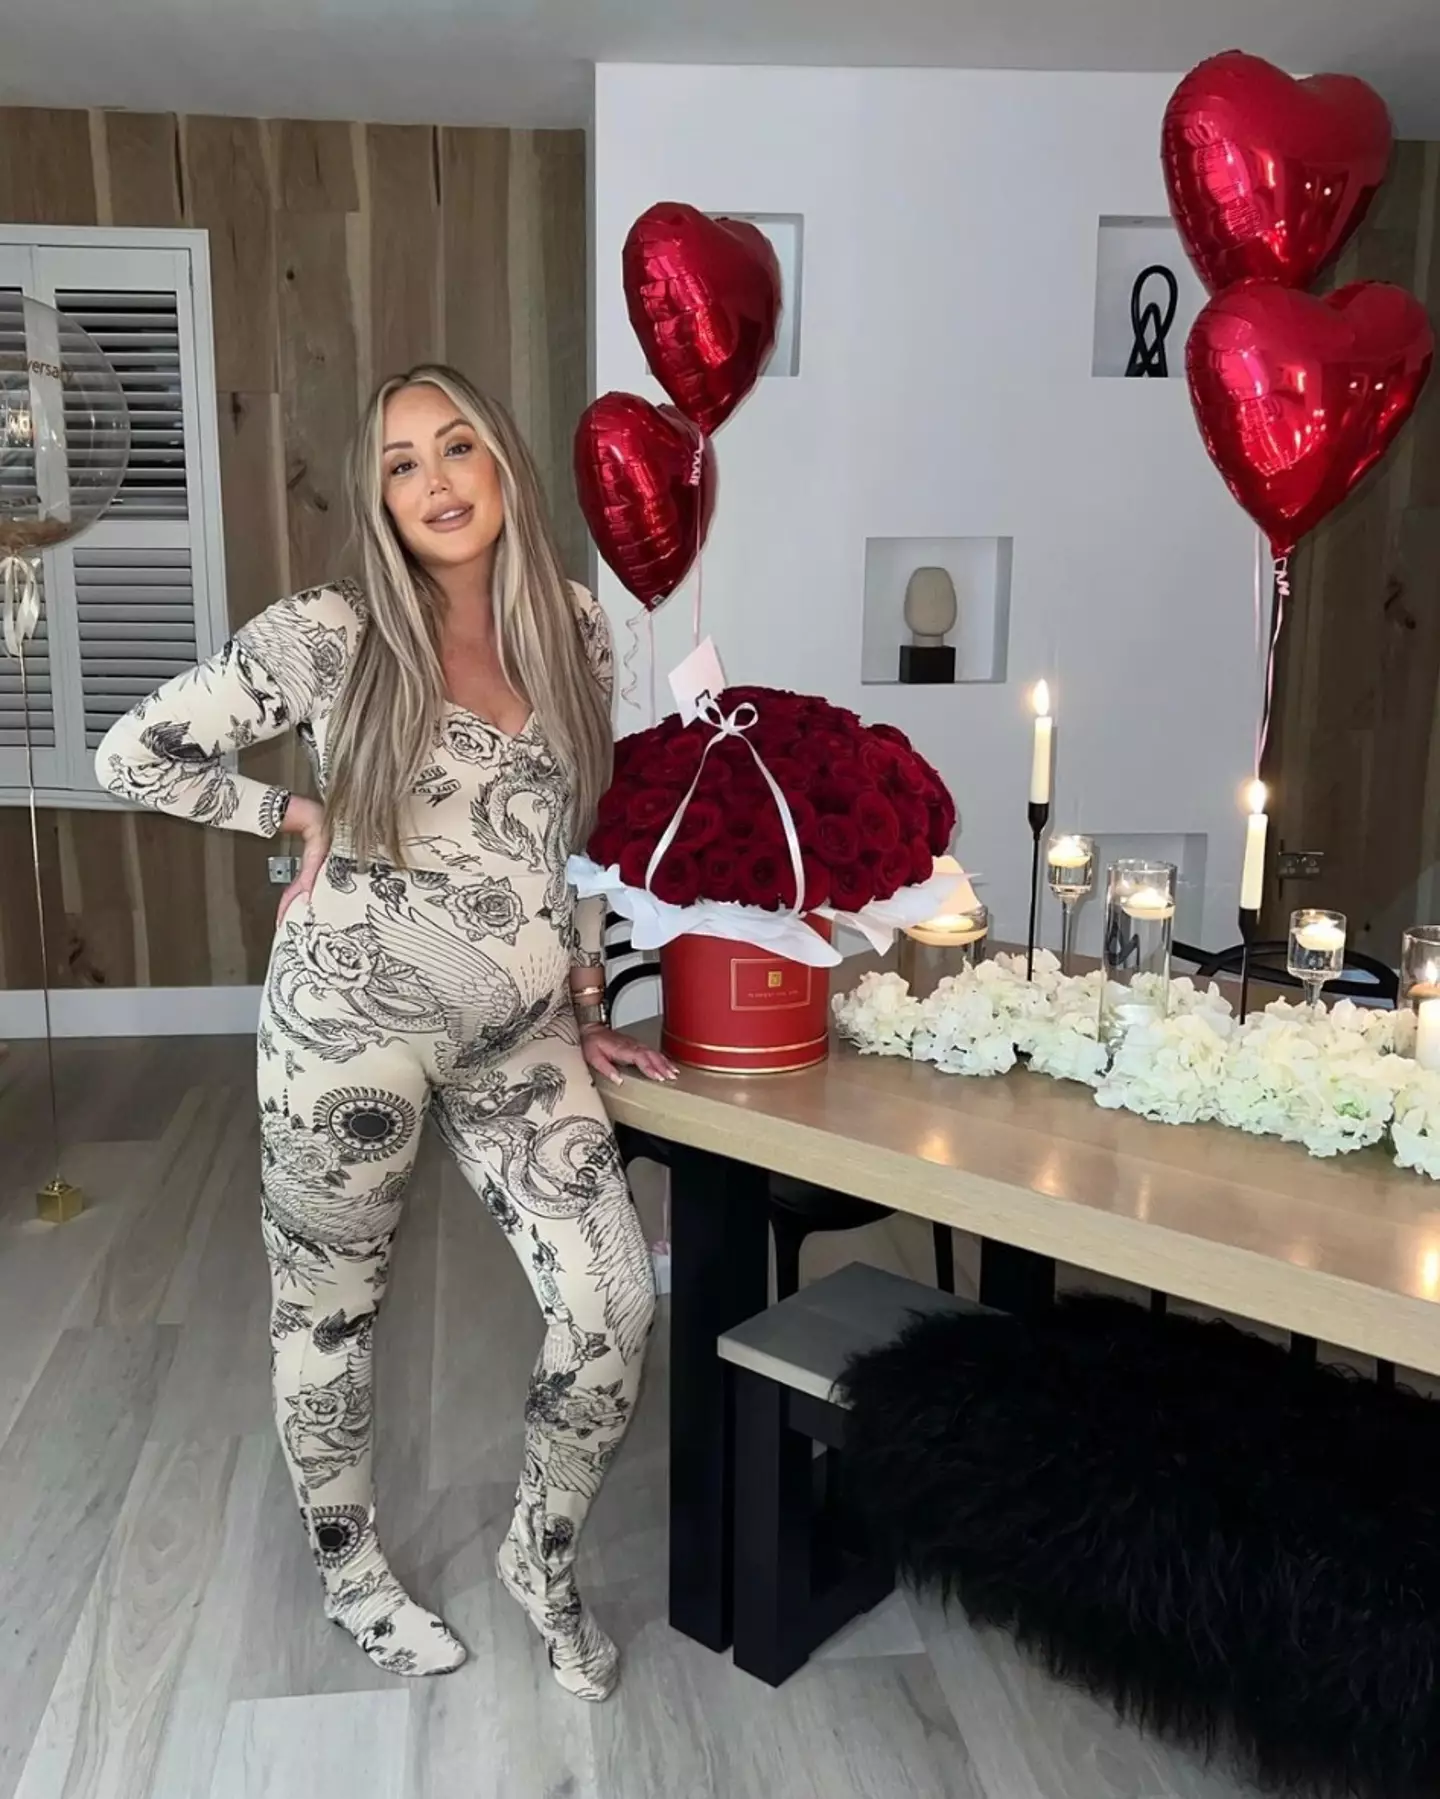 Charlotte Crosby looks amazing since giving birth.